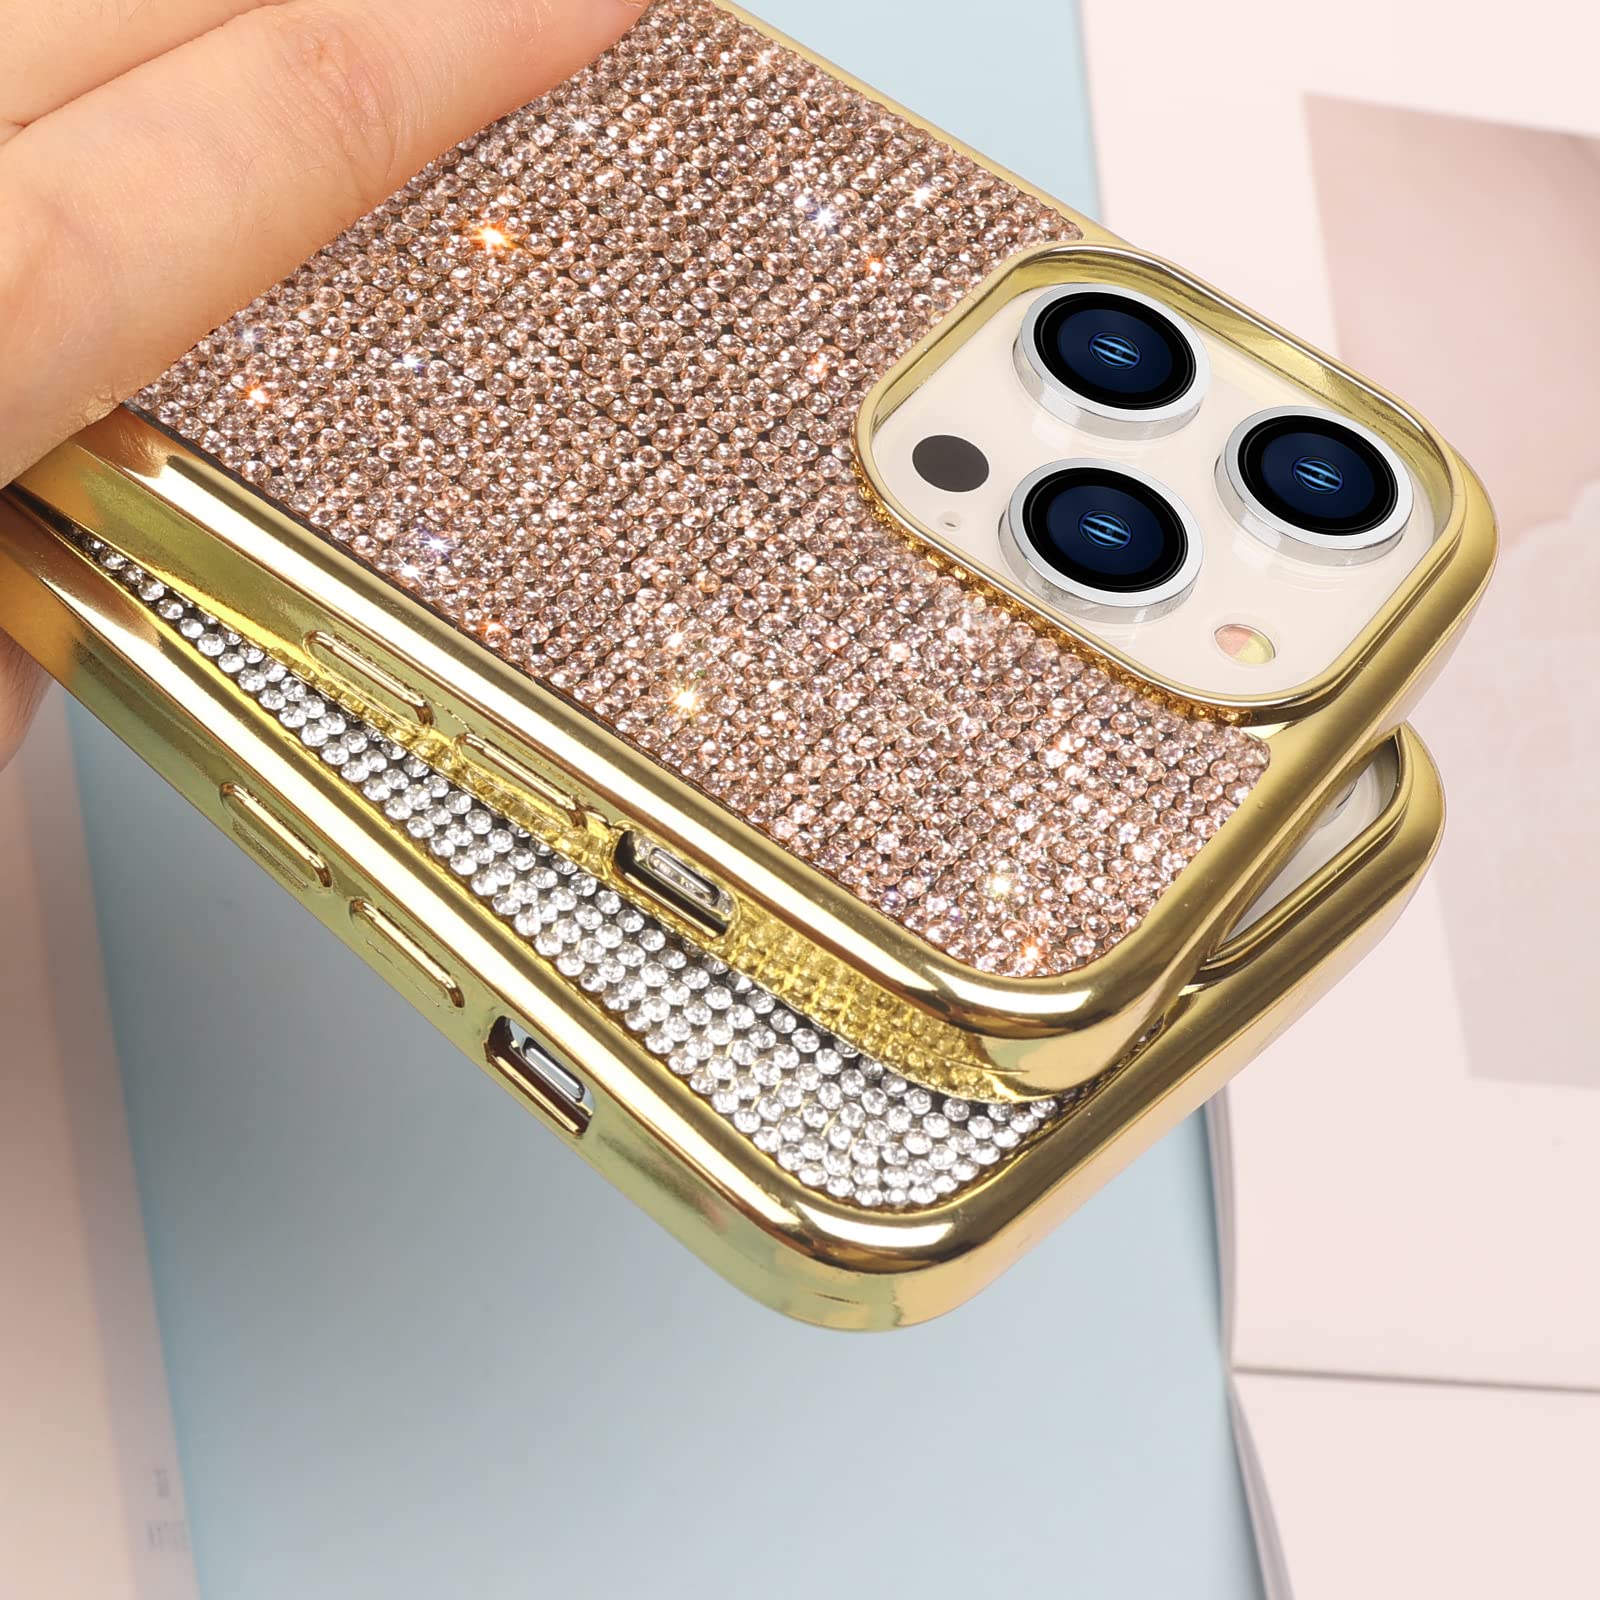 LUVI Compatible with Cute iPhone 14 Pro Max Bling Diamond Case Glitter for Women 3D Rhinestone Crystal Shiny Sparkly Protective Cover with Electroplate Plating Bumper Luxury Fashion Case Gold